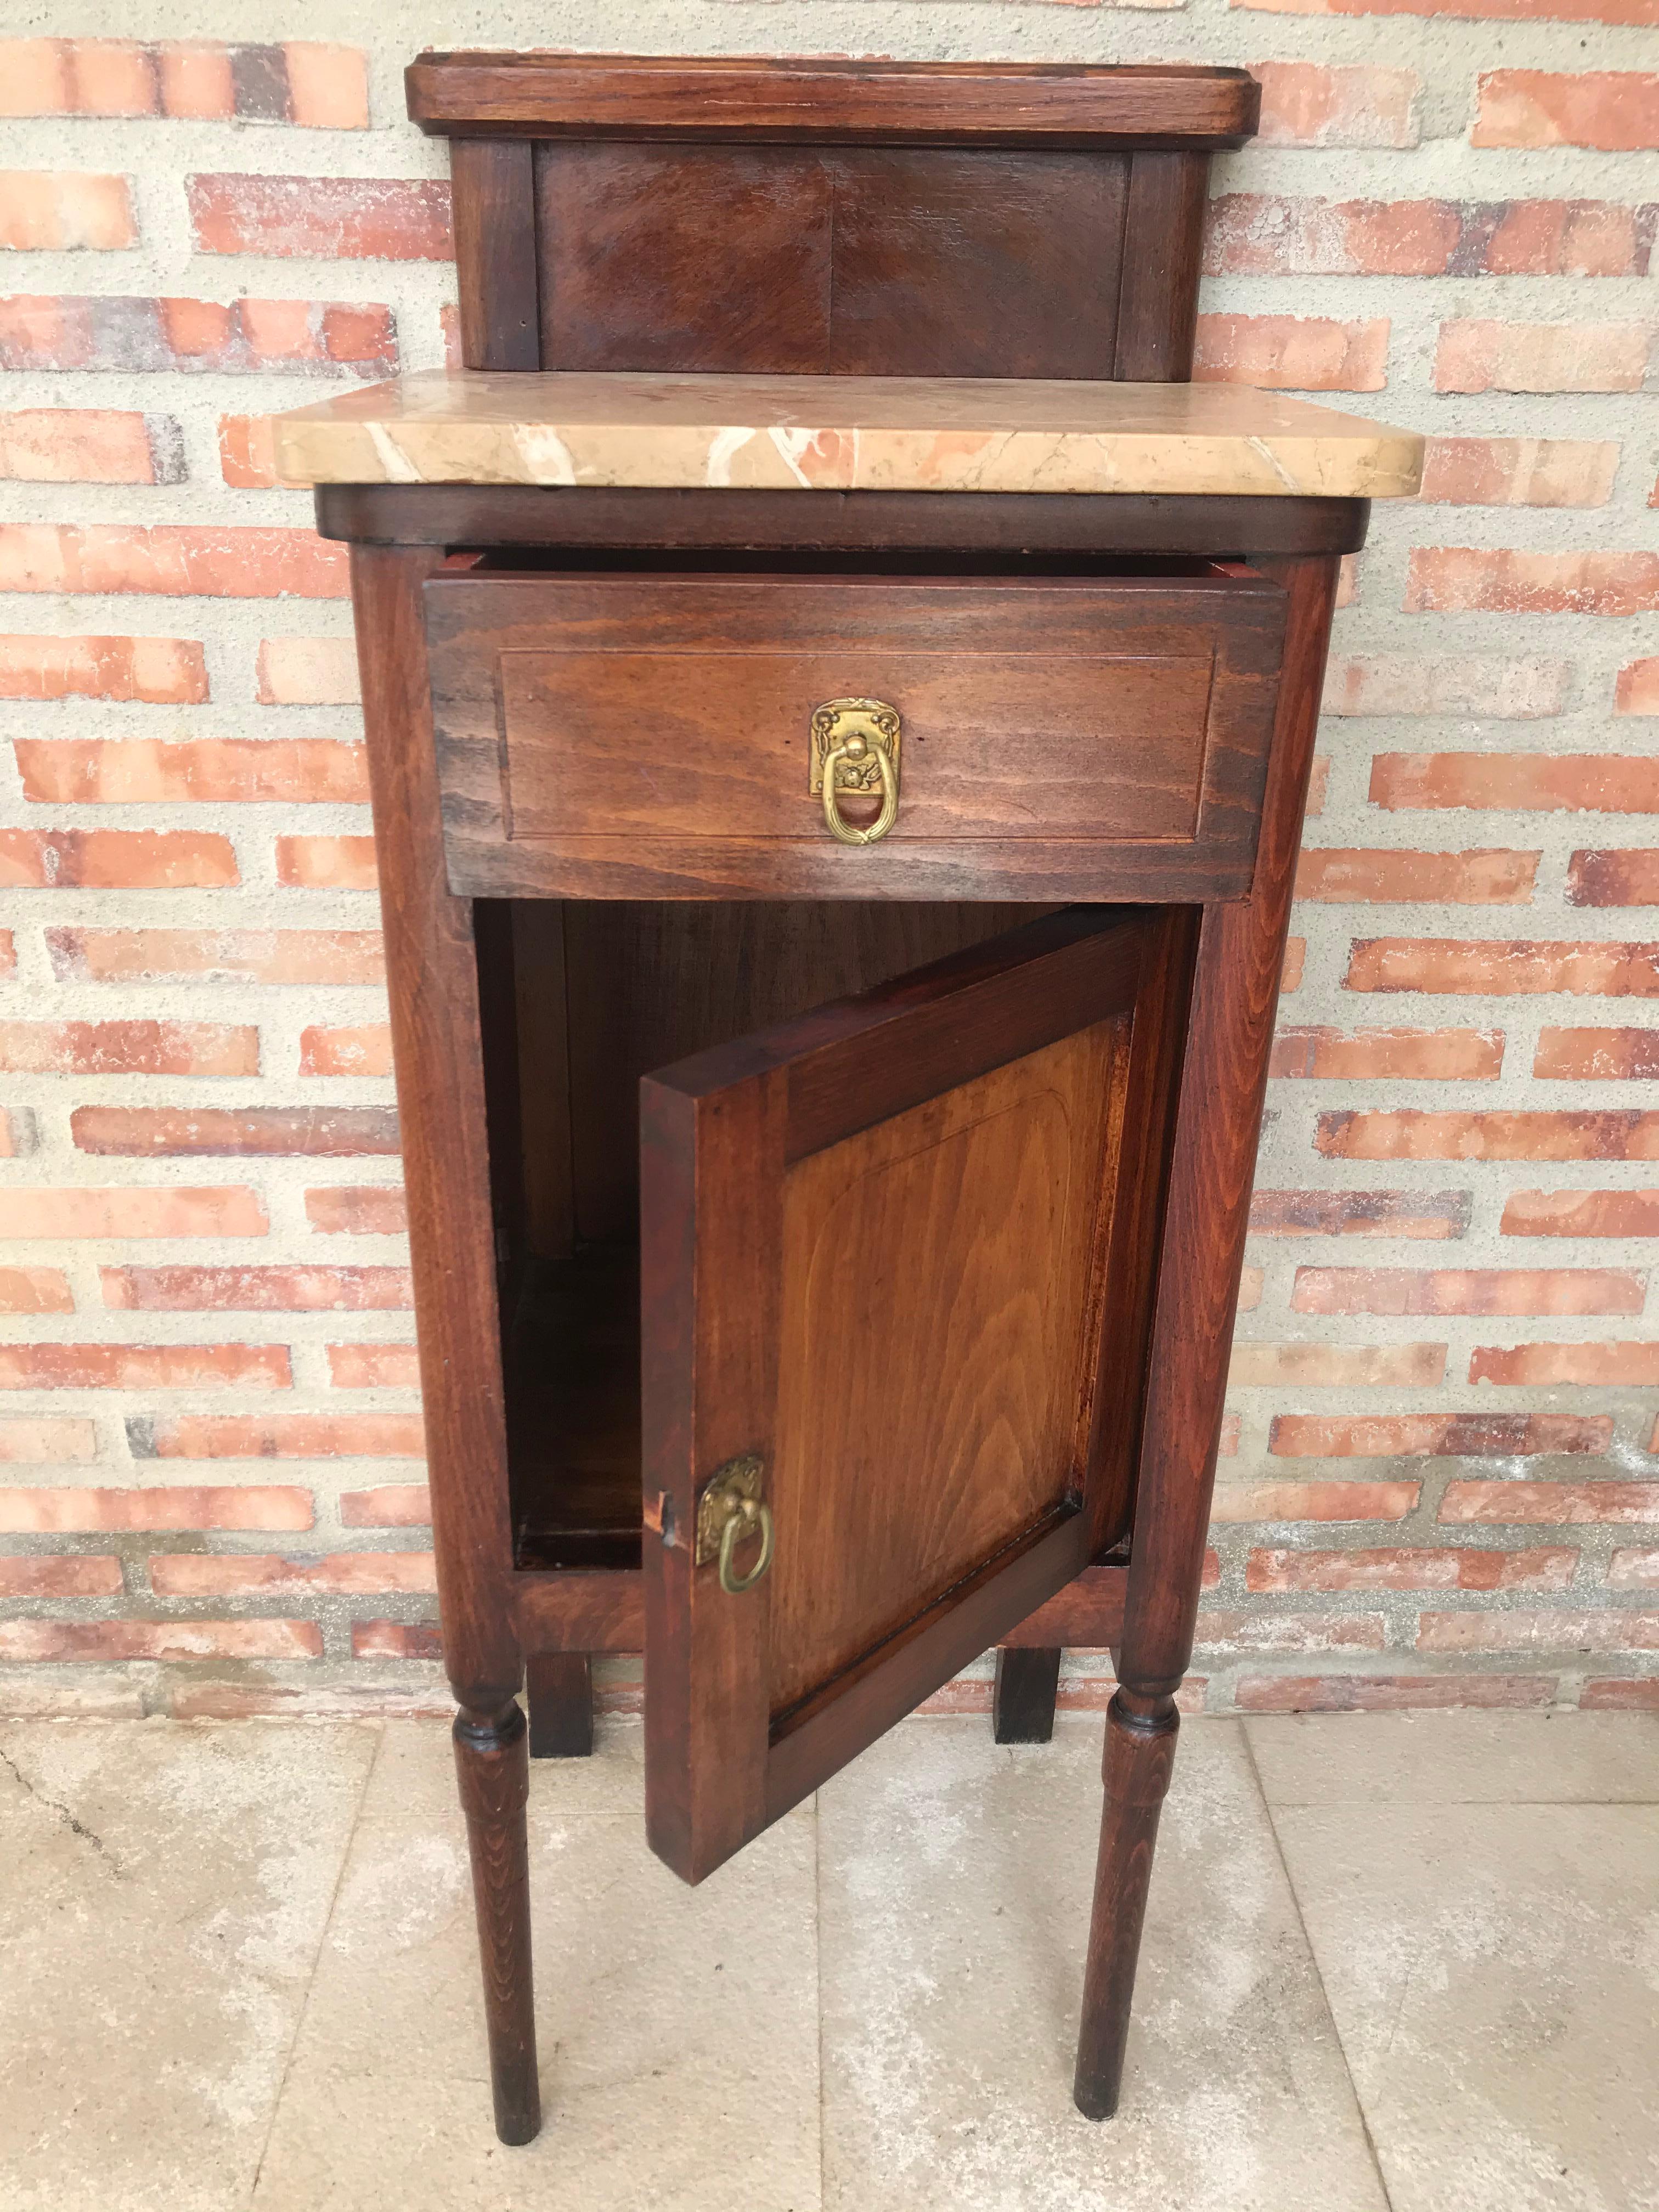 Modern Art Nouveau Walnut Nightstand with Crest, Marble Top and Glass Shelve